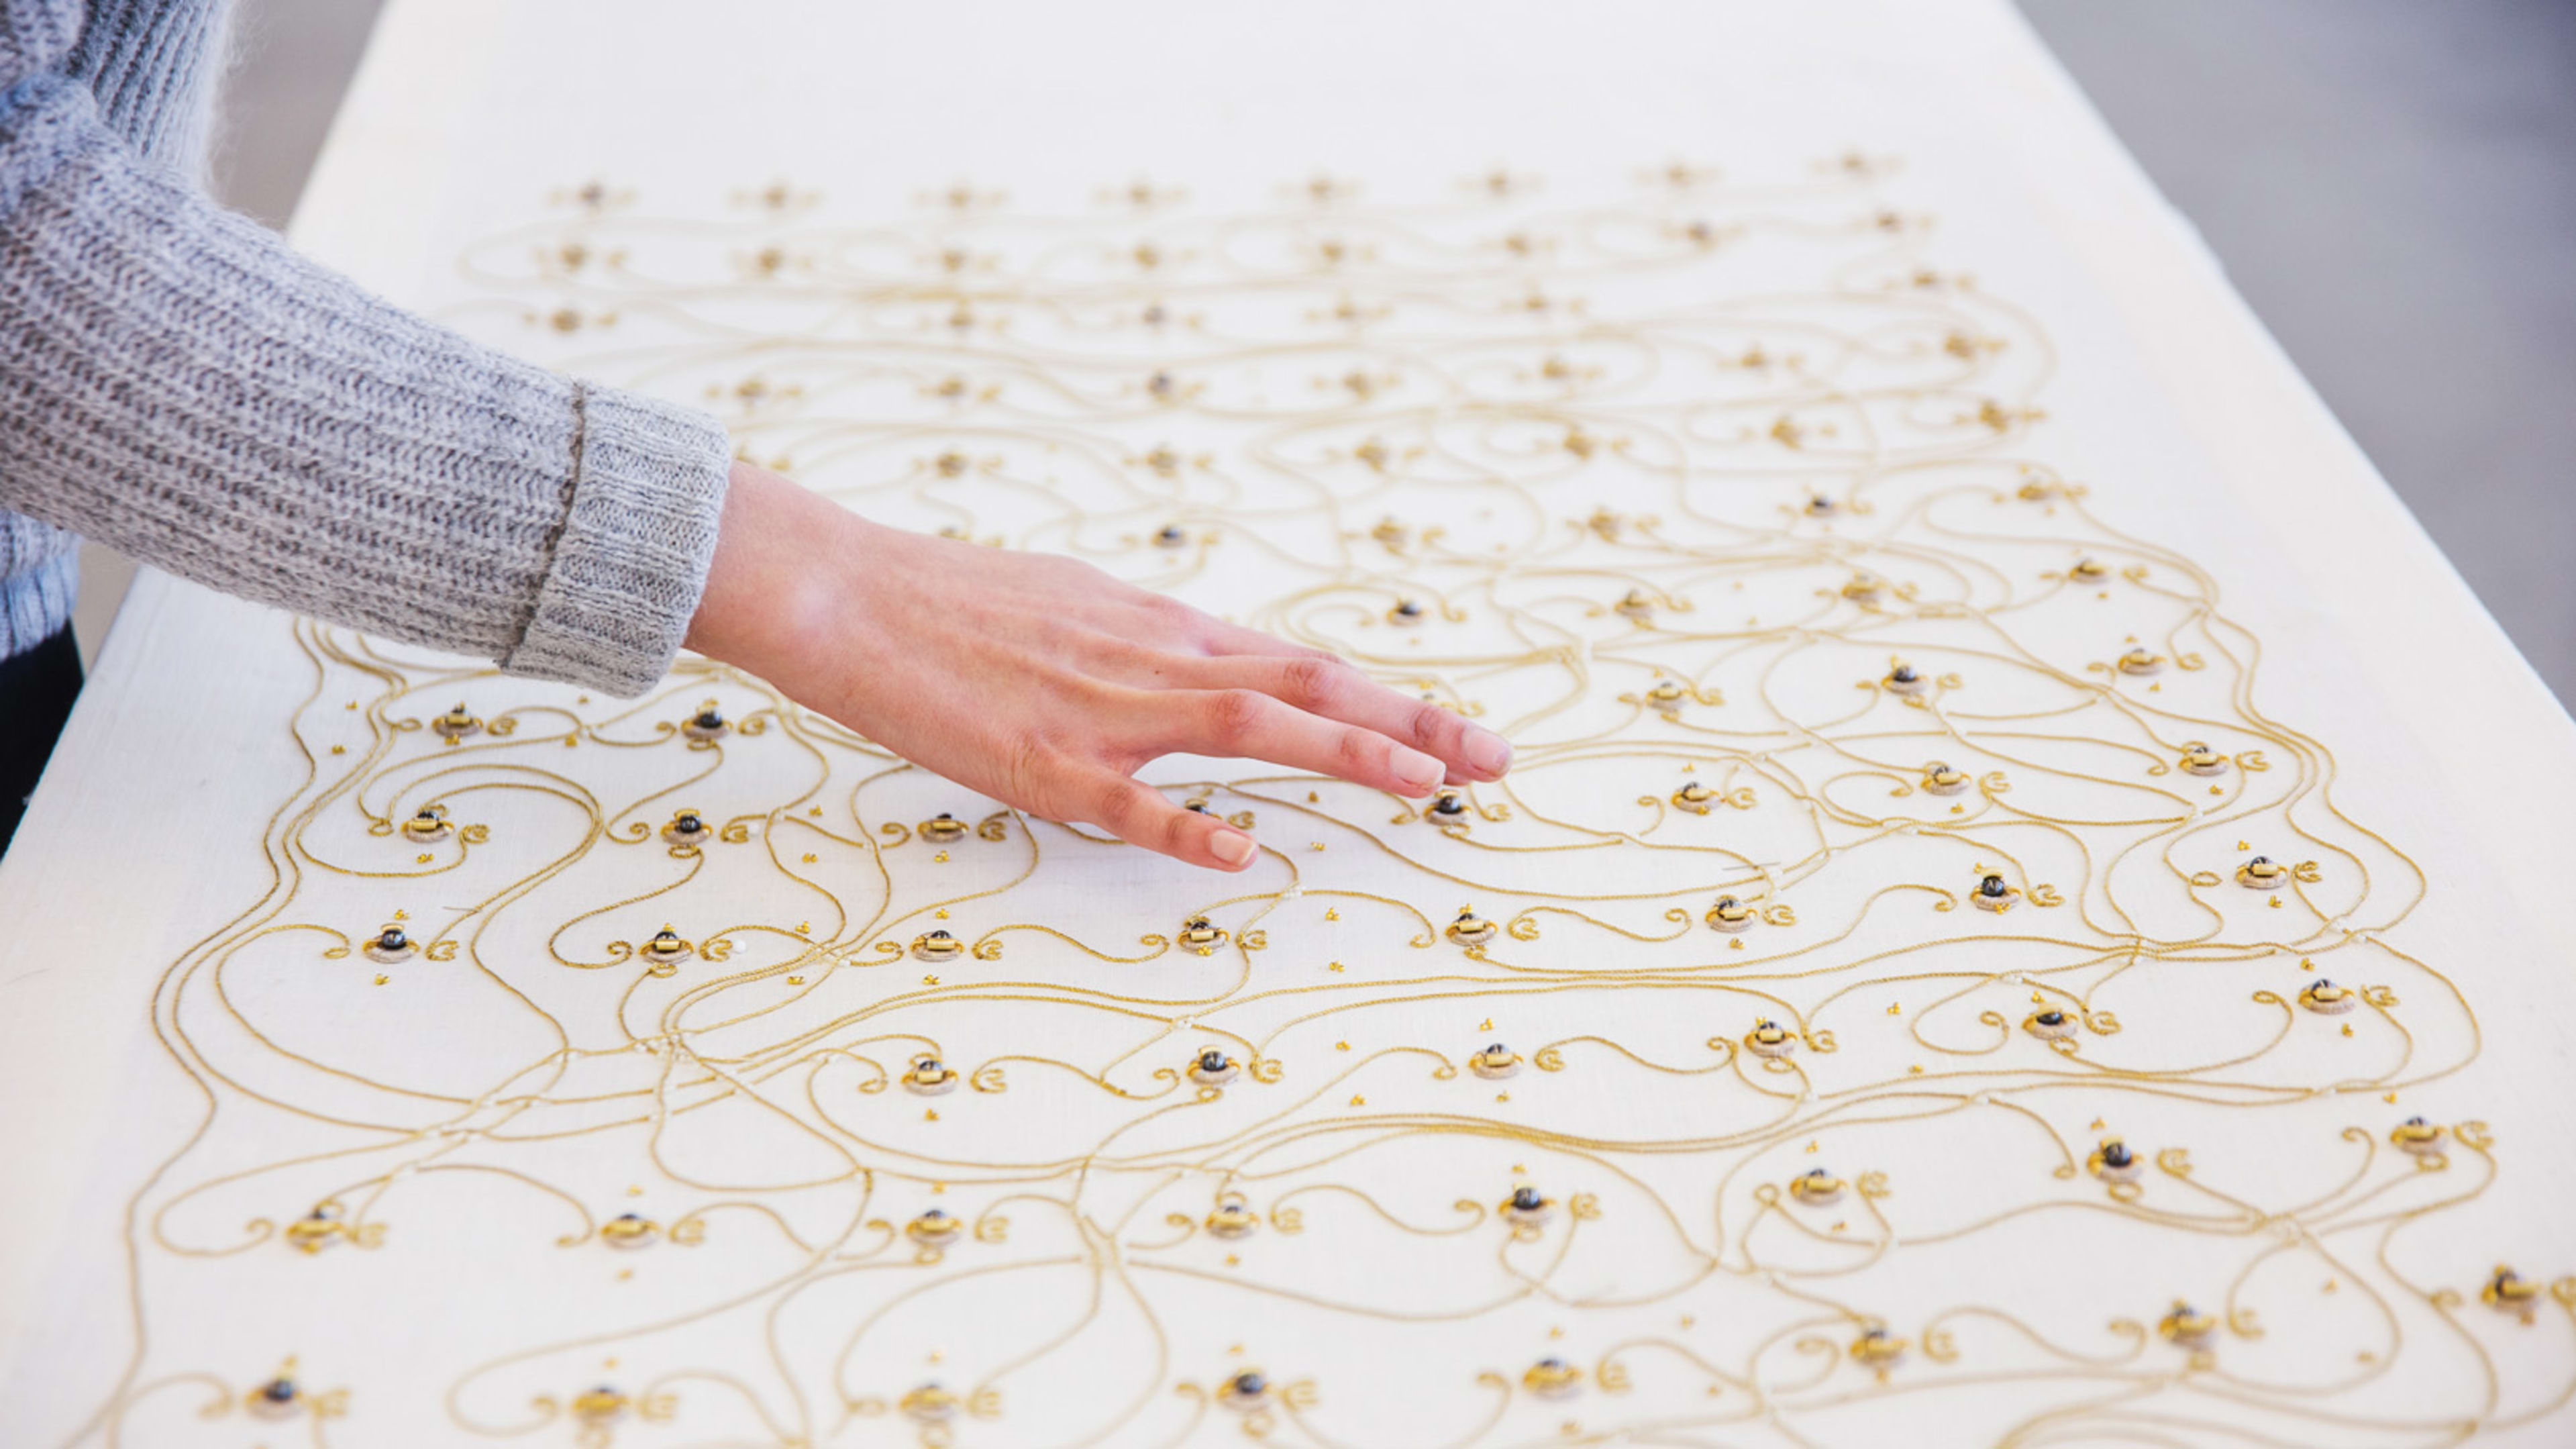 This gorgeous golden tapestry is actually a functional computer